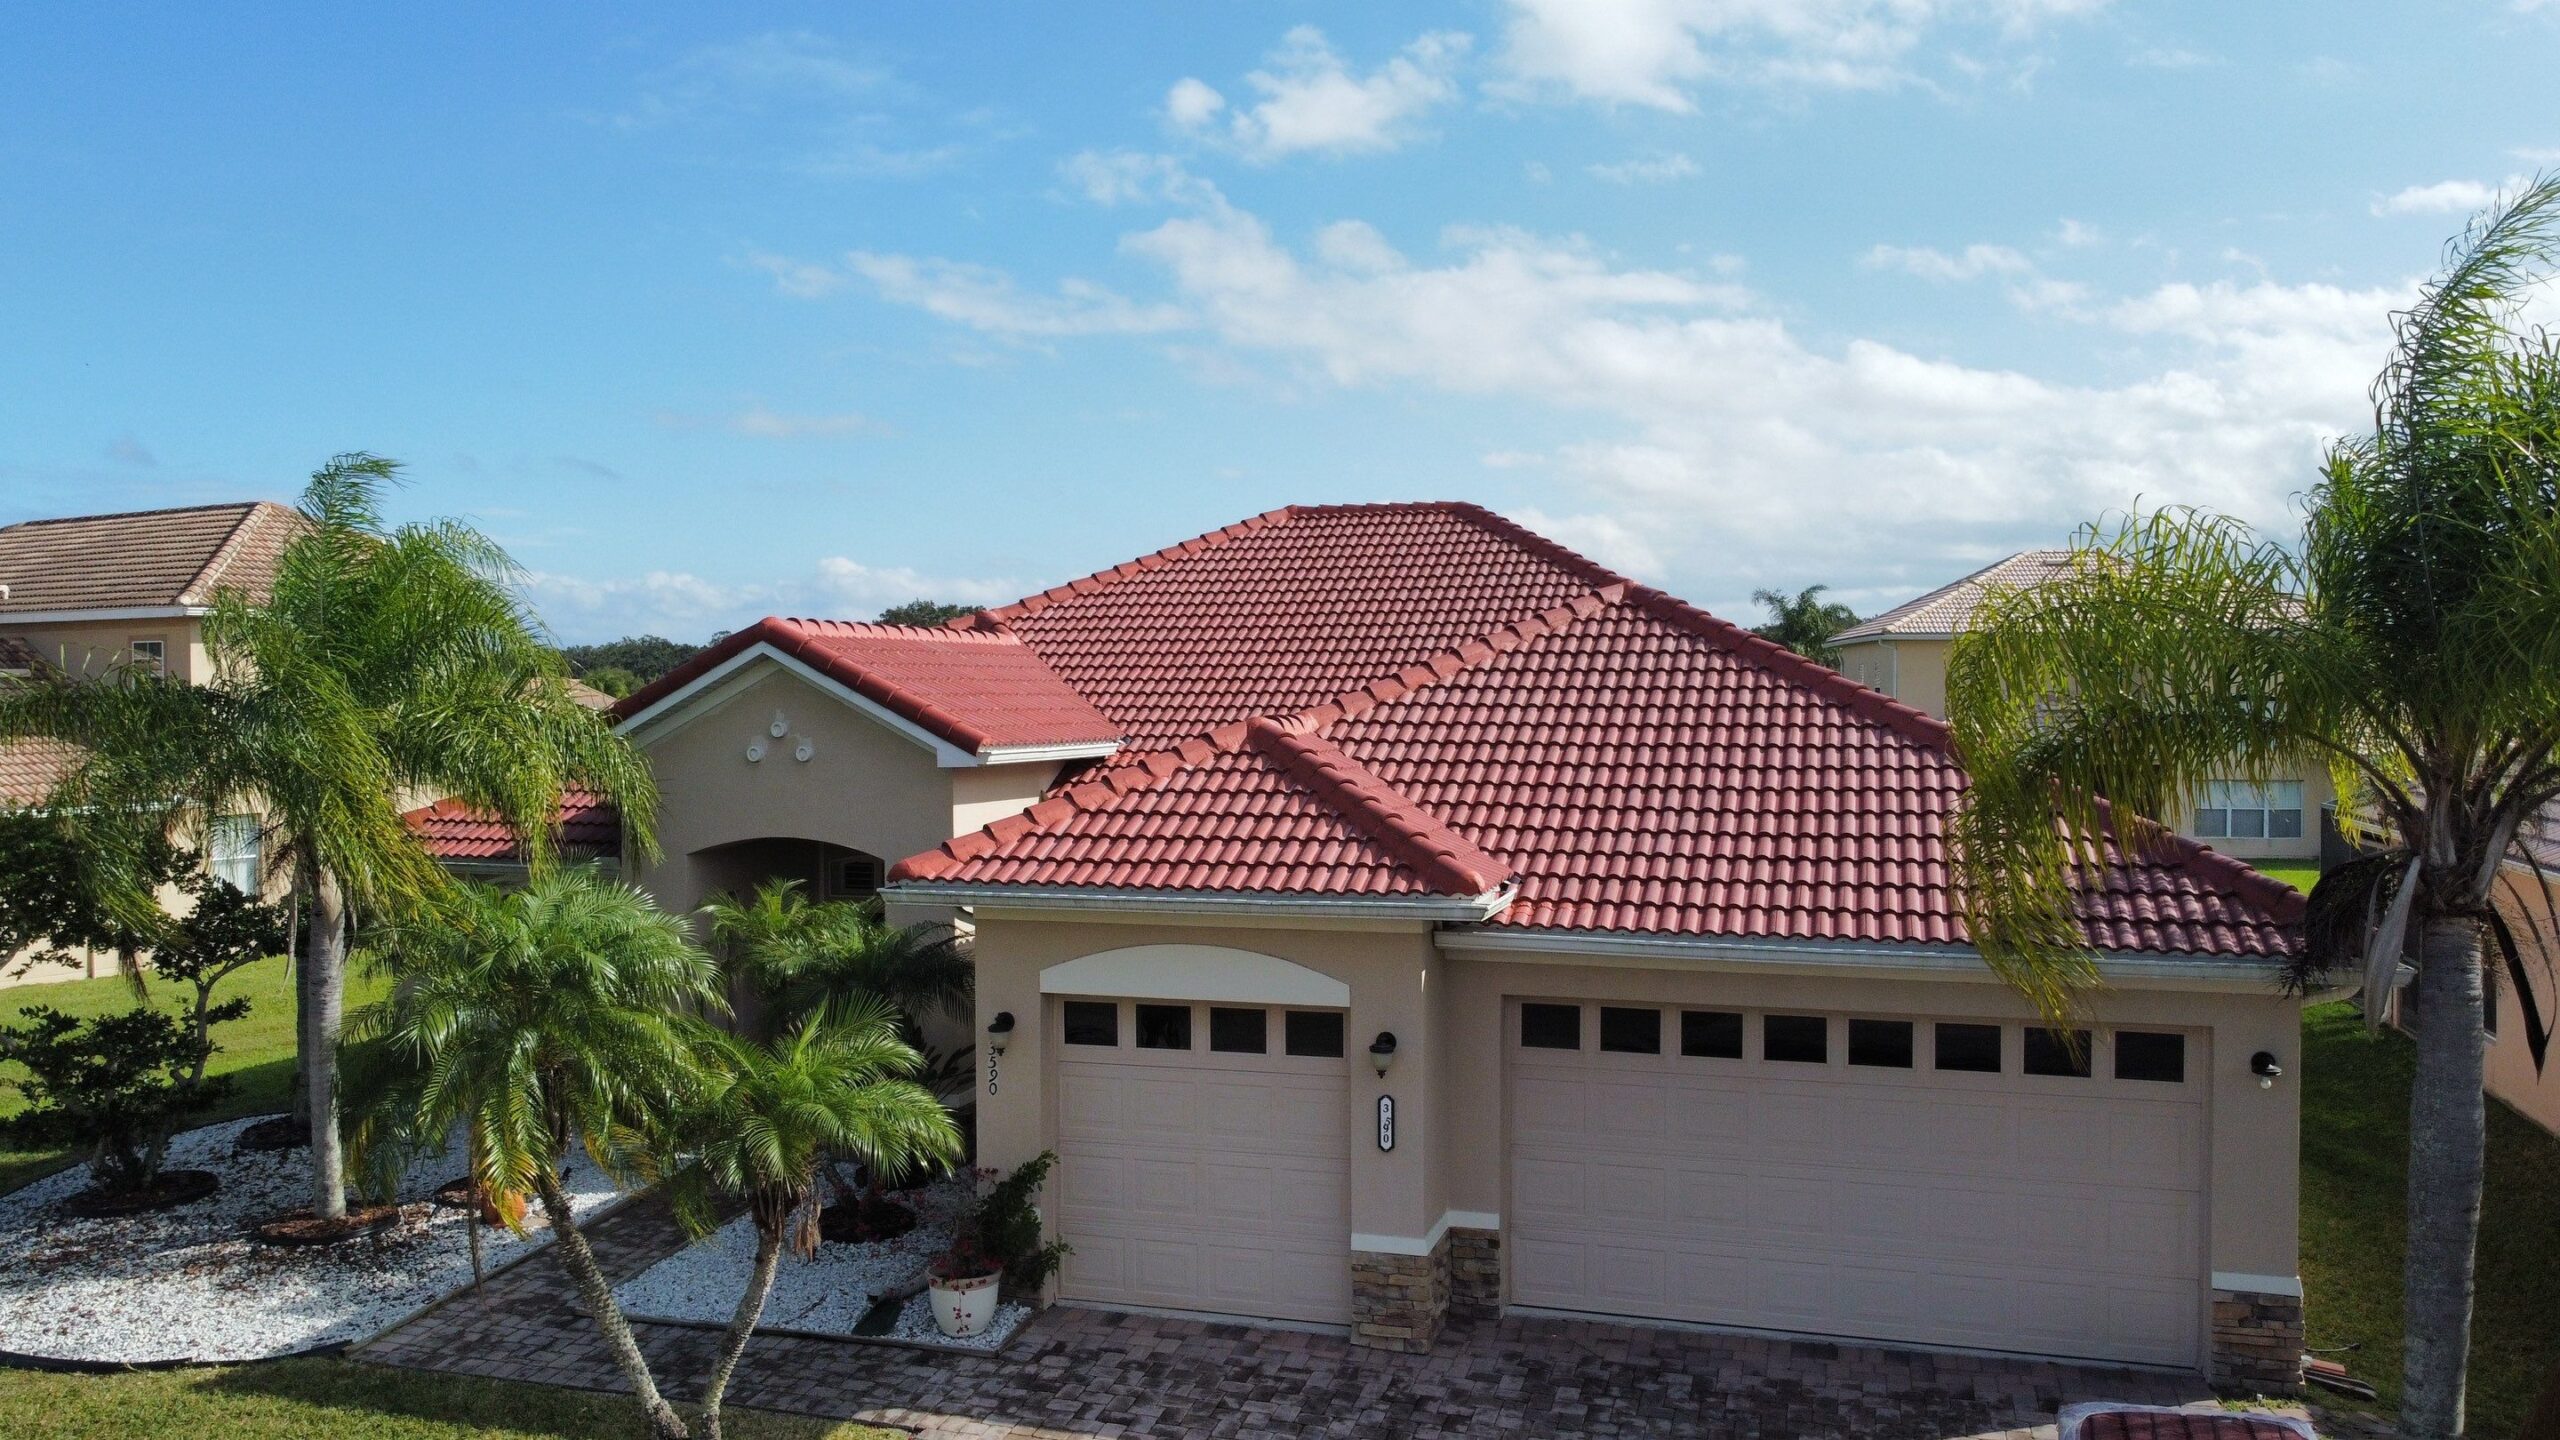 Curbside view of a home with new tile roofing in Greater Orlando, FL